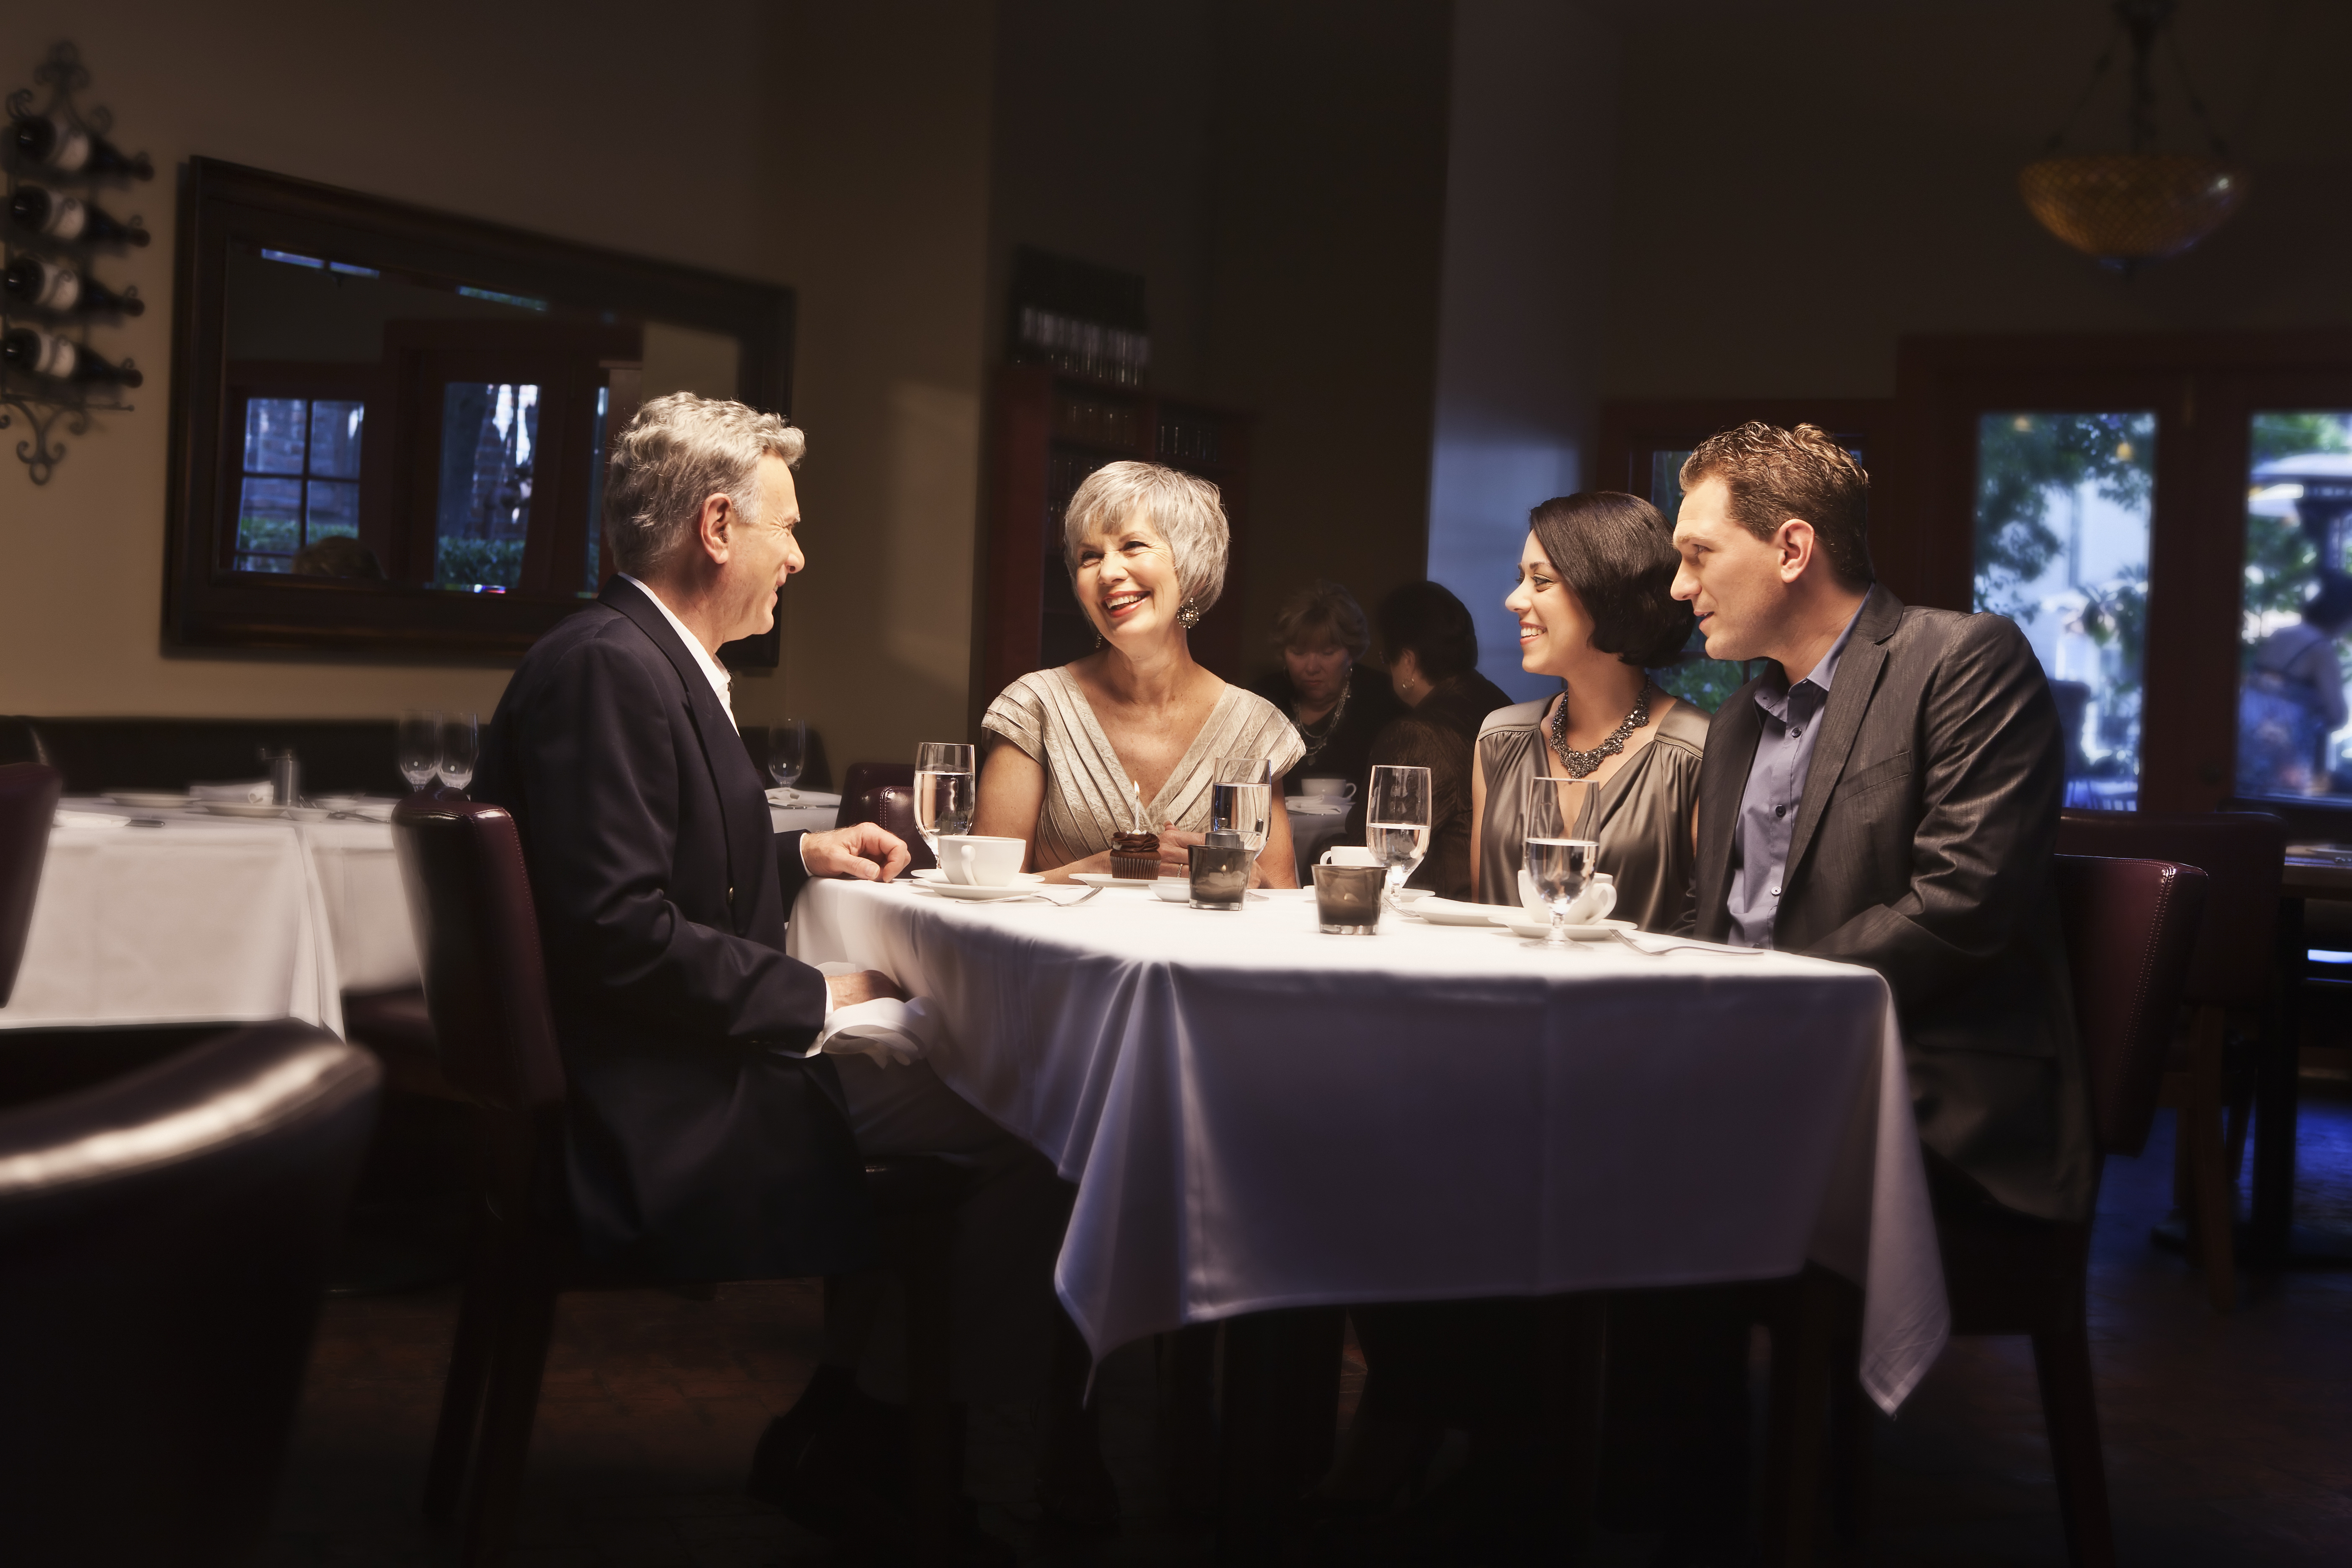 A couple having dinner with their parents | Source: Getty Images